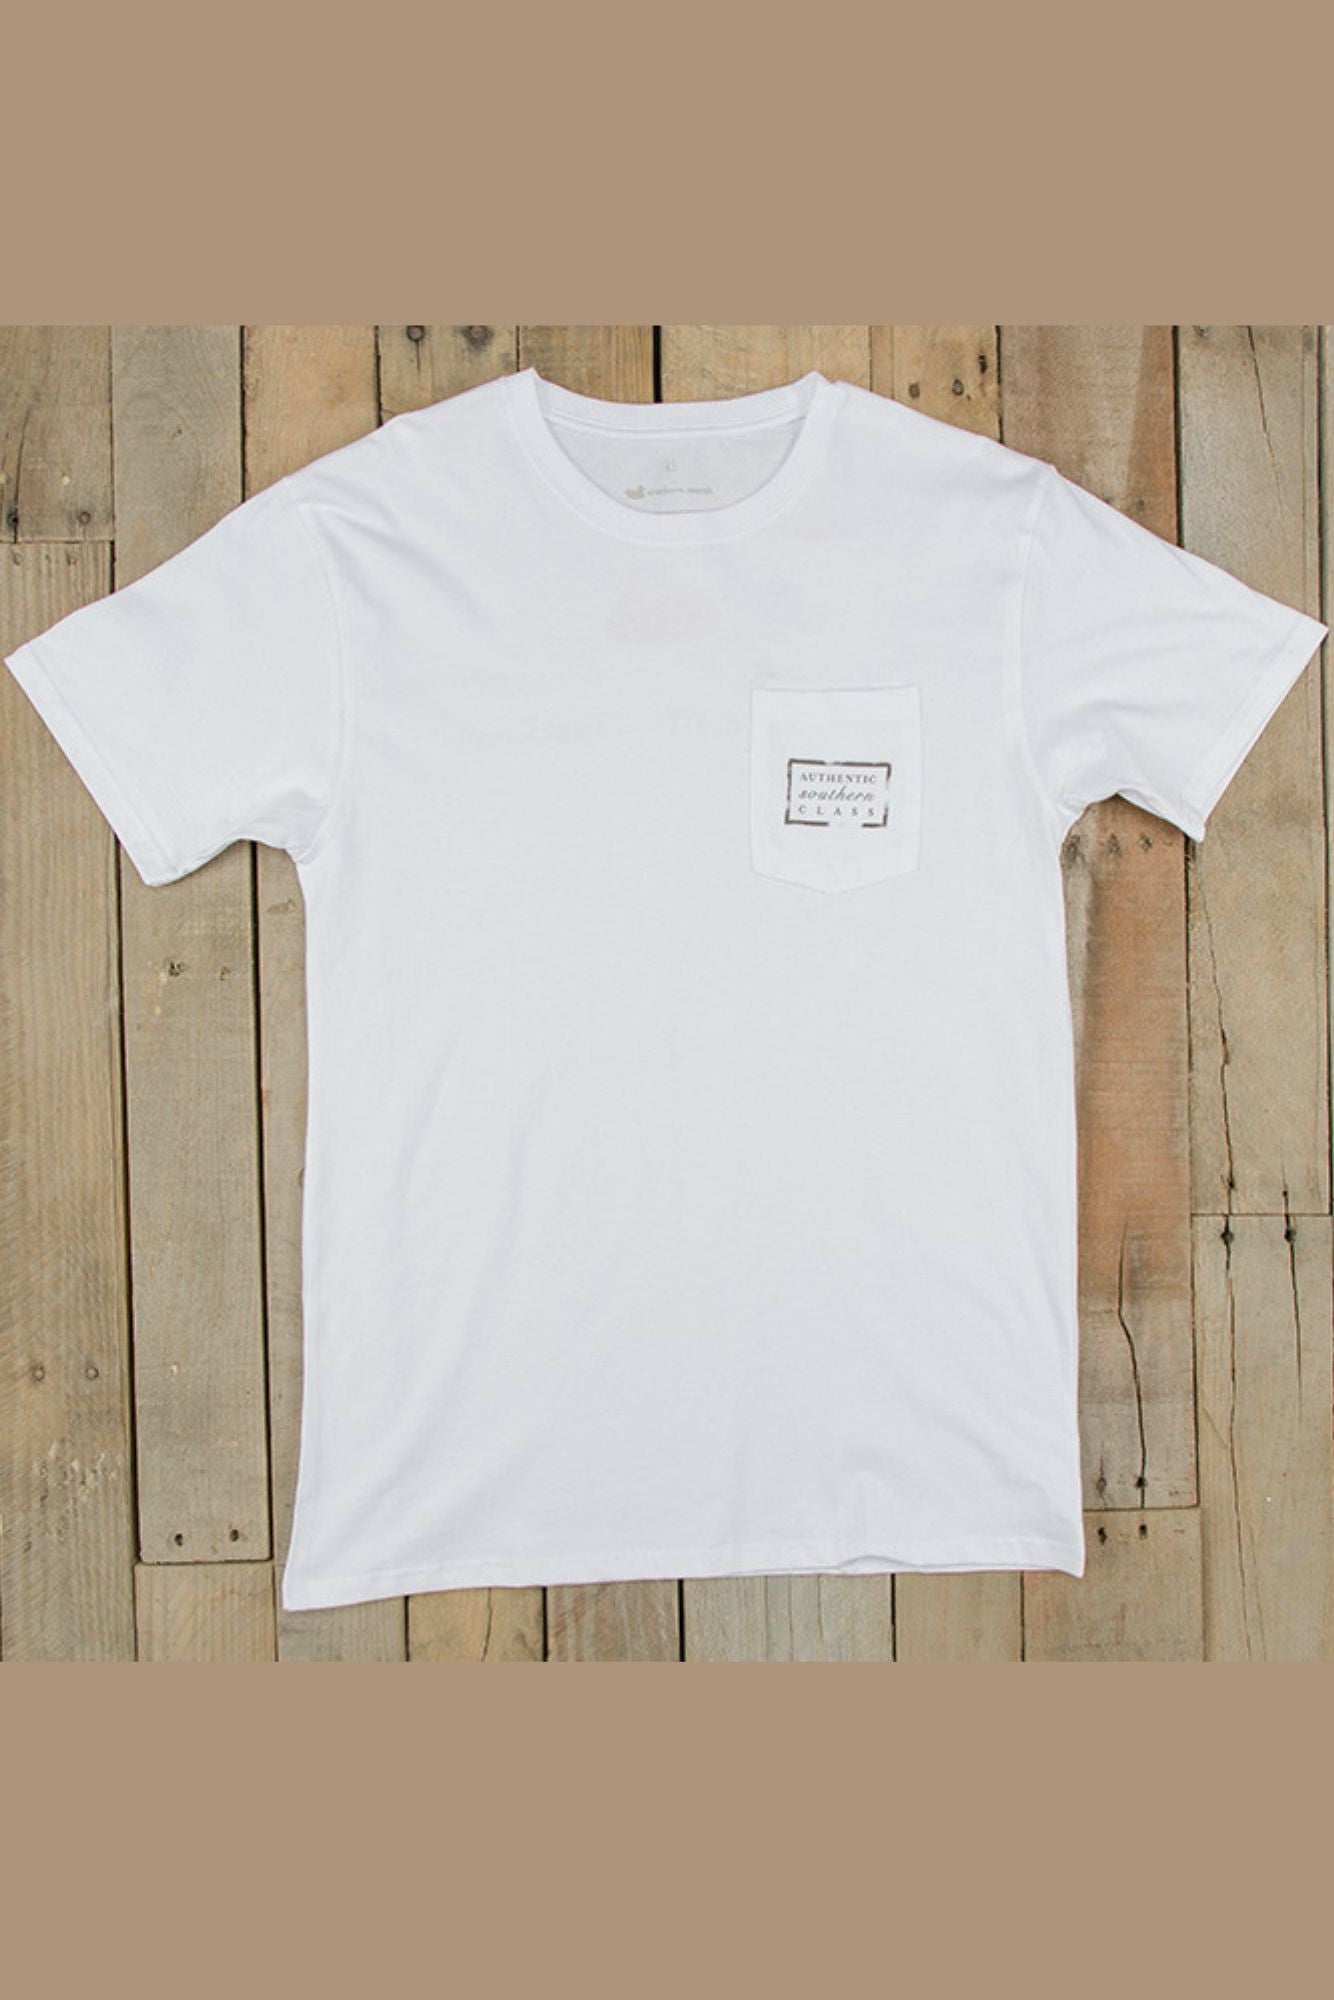 Southern Marsh: Authentic Tee, White